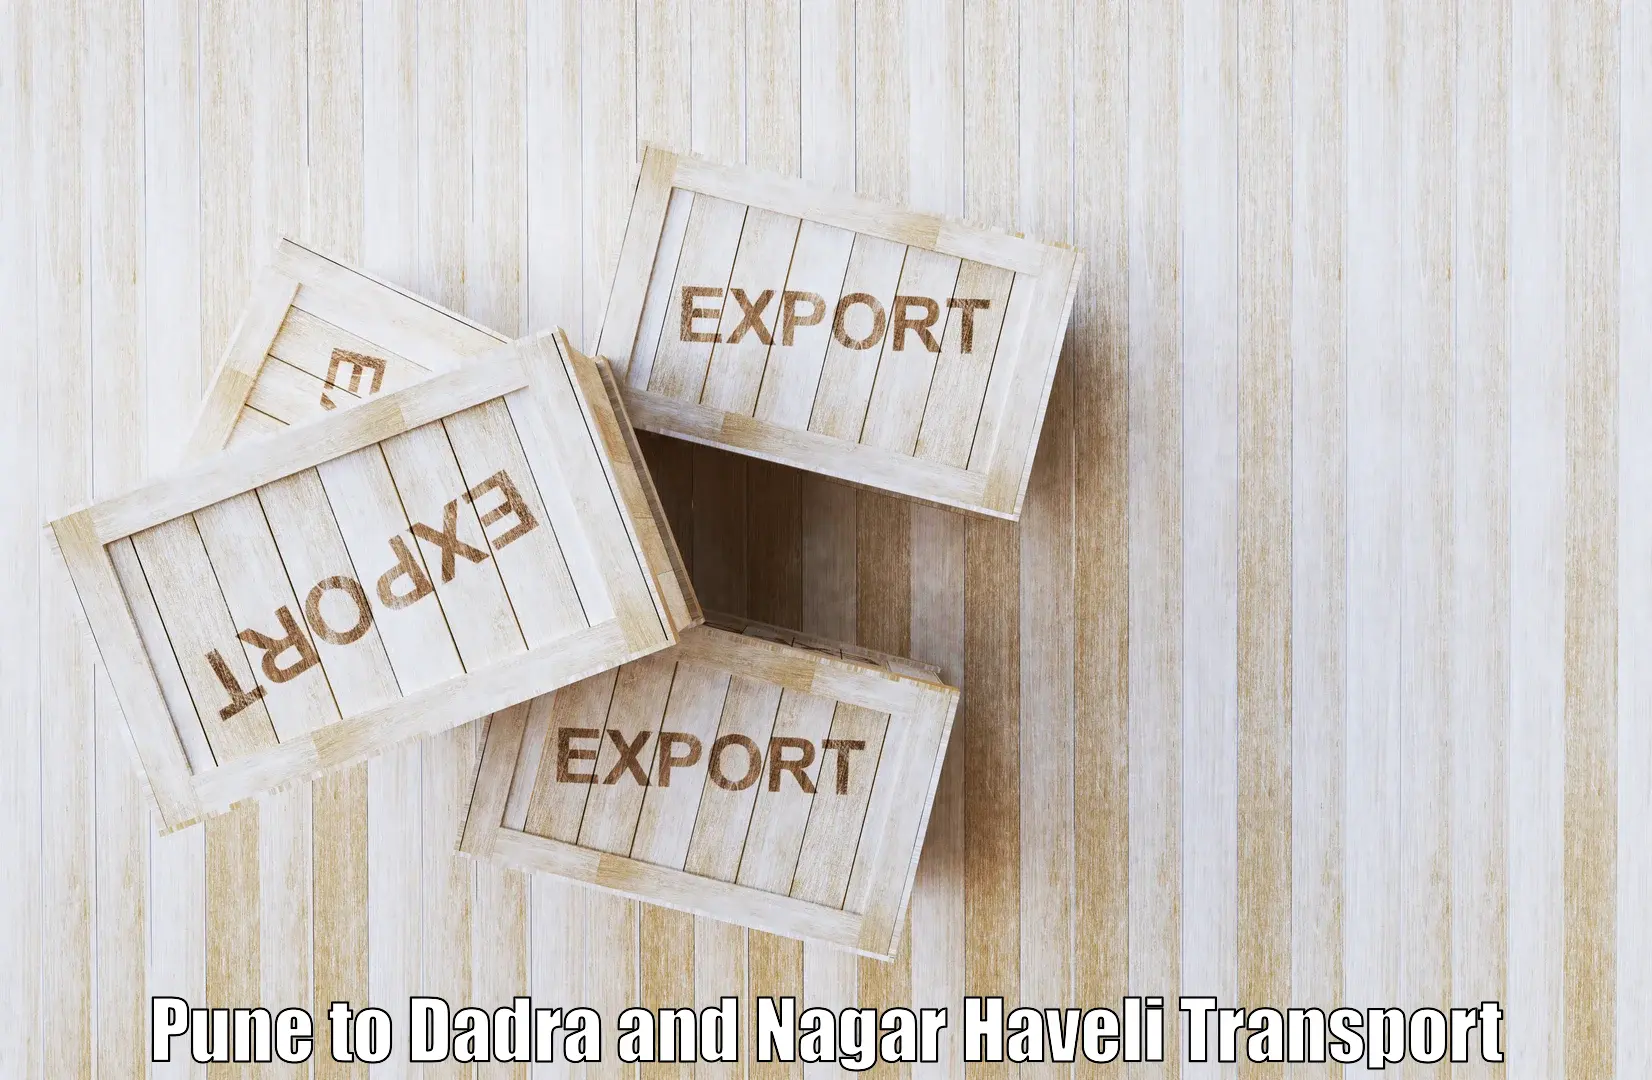 Lorry transport service in Pune to Dadra and Nagar Haveli